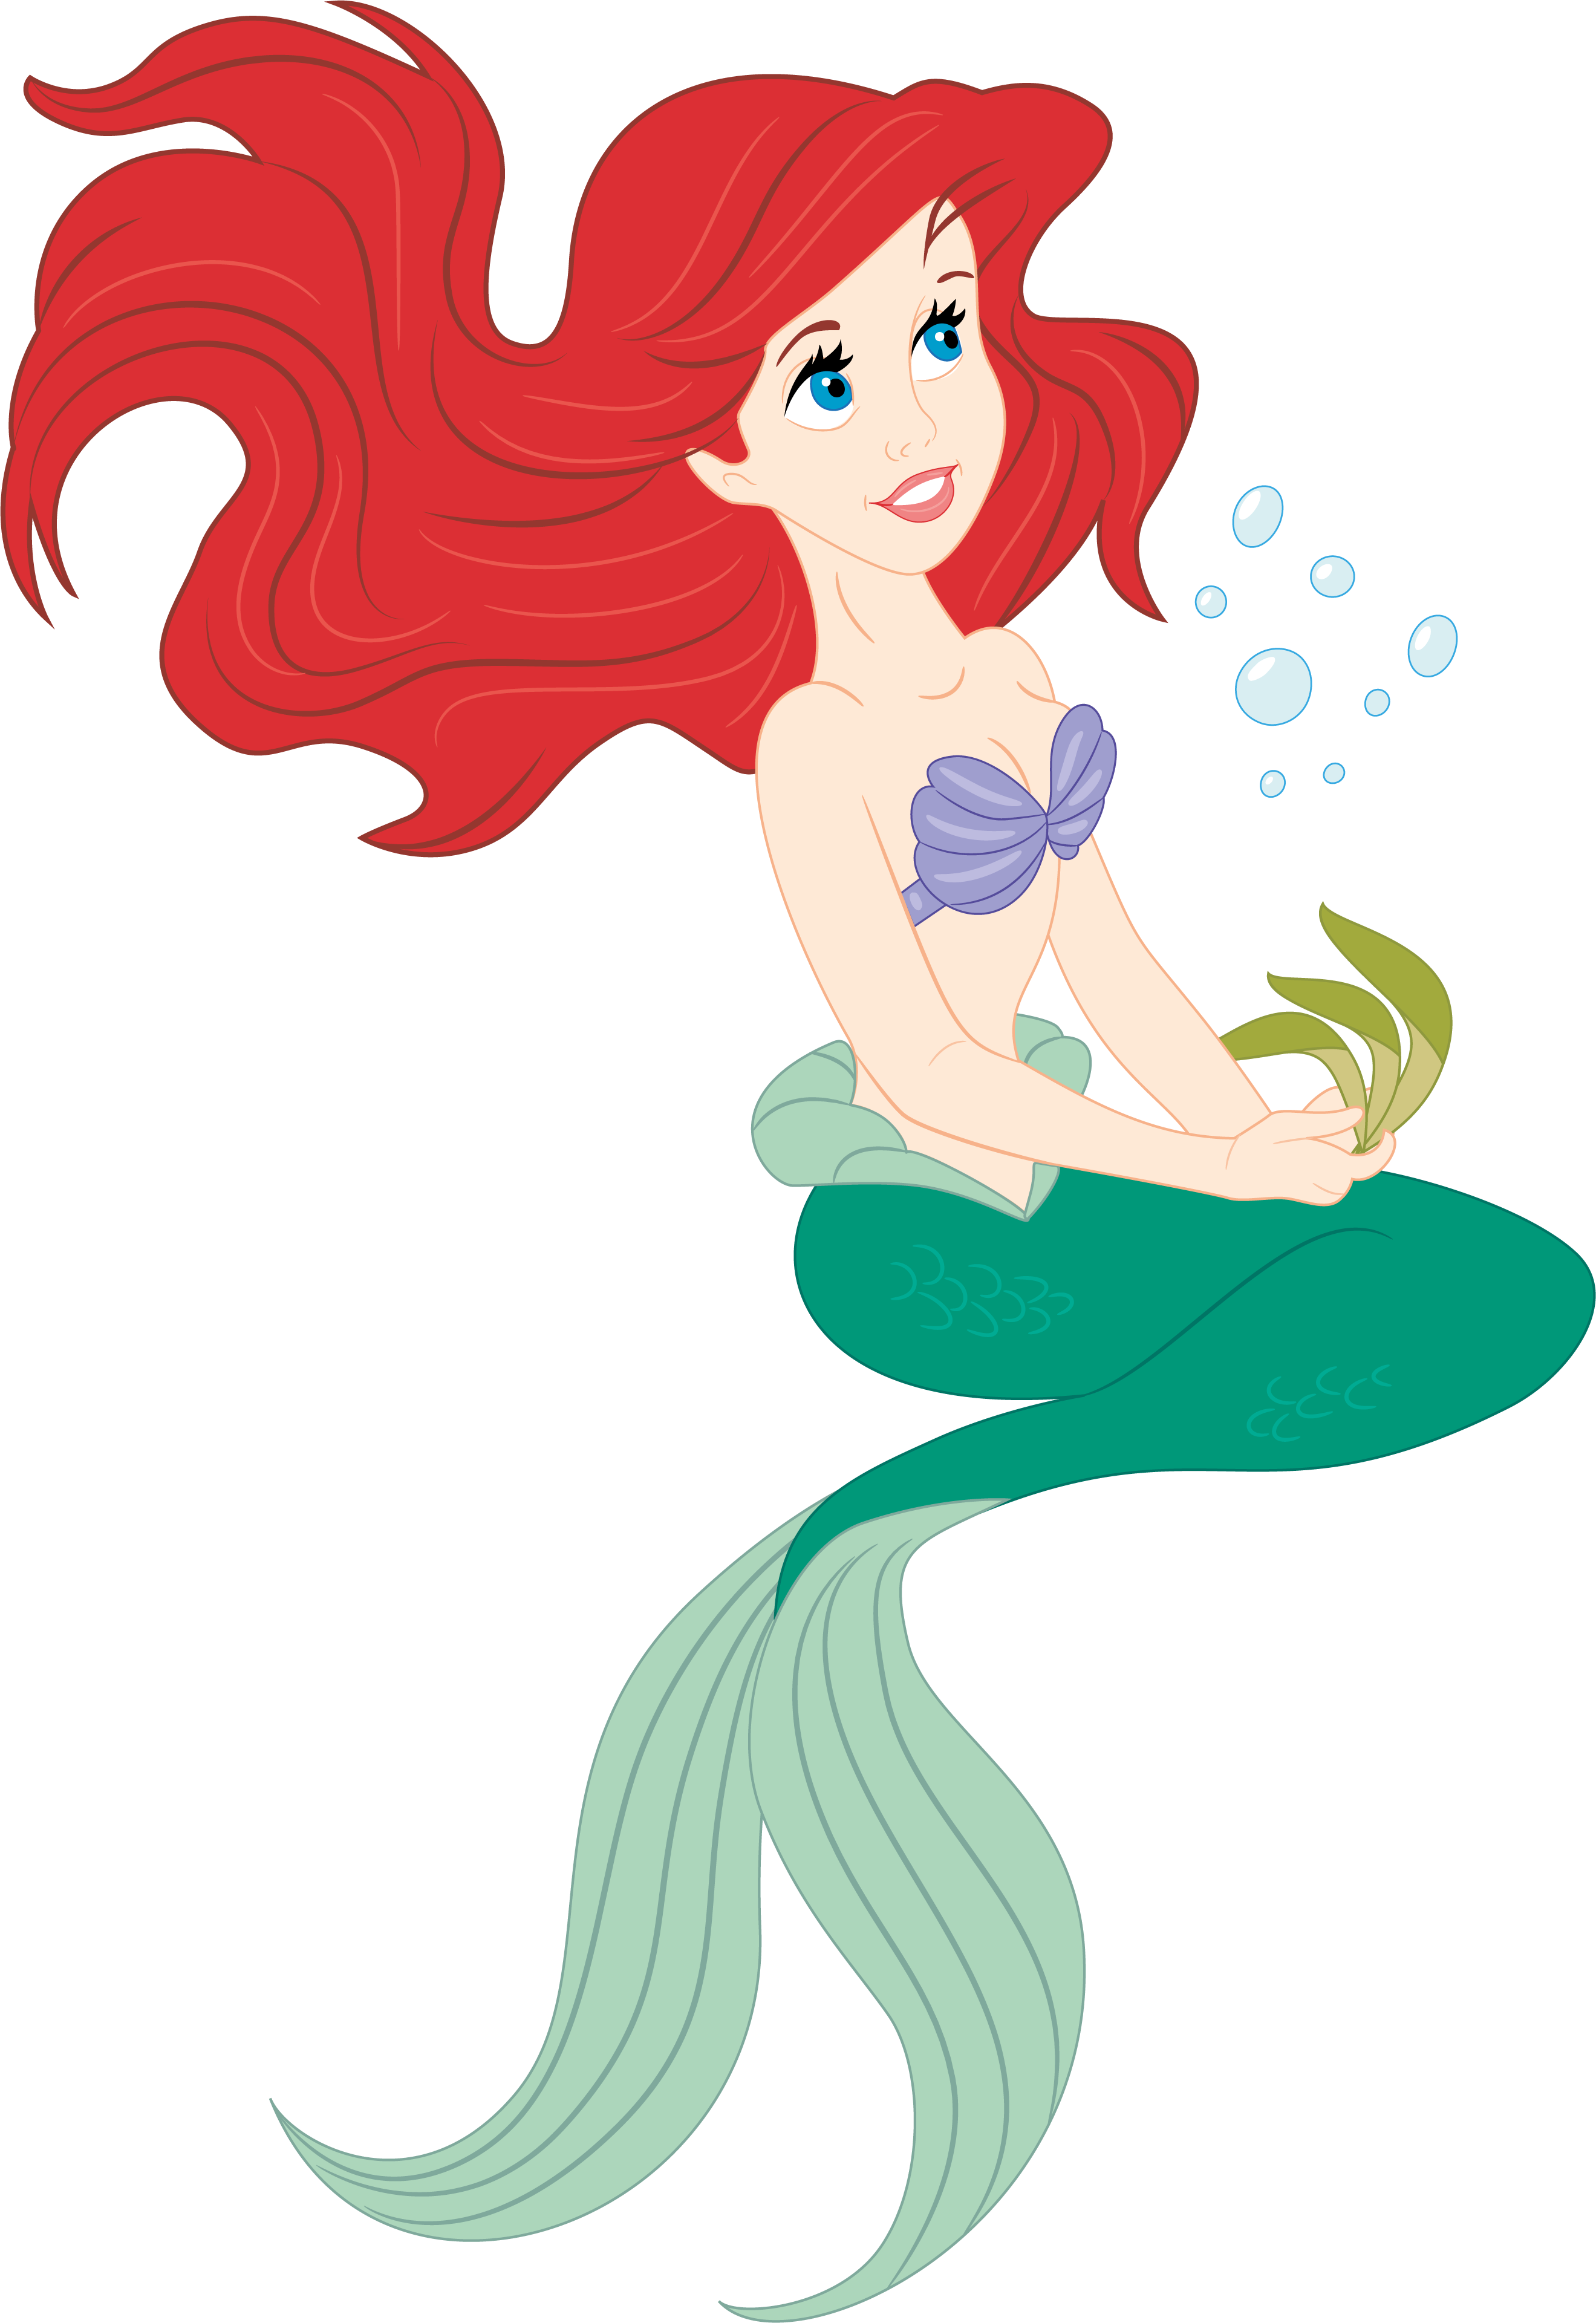 An image with a classic mermaid.